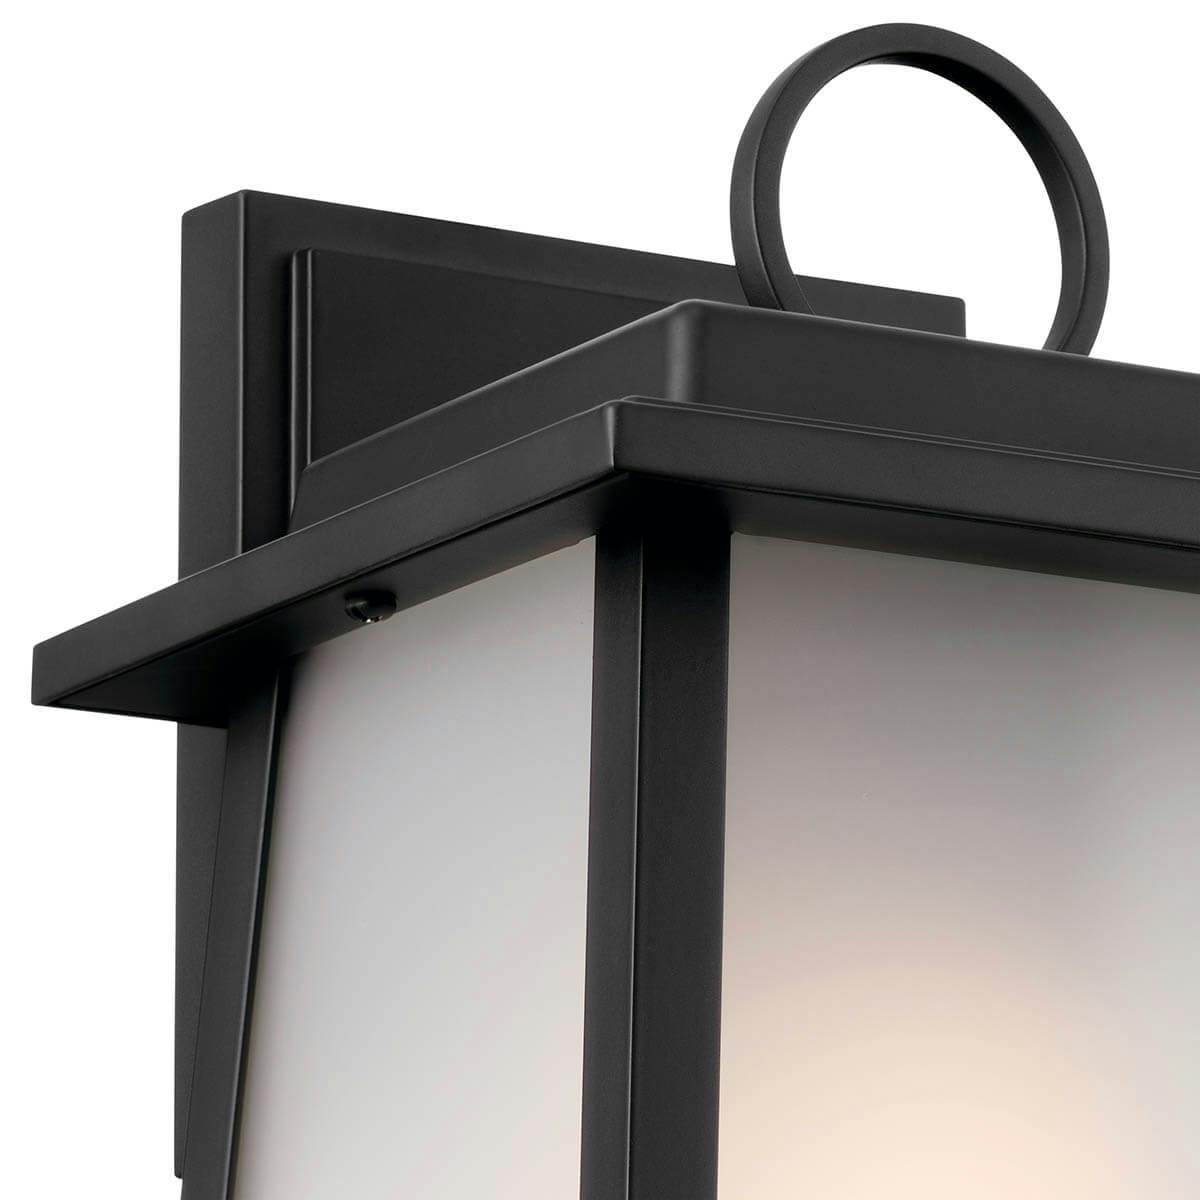 Close up view of the Noward 10.25" 1 Light Wall Light Black on a white background